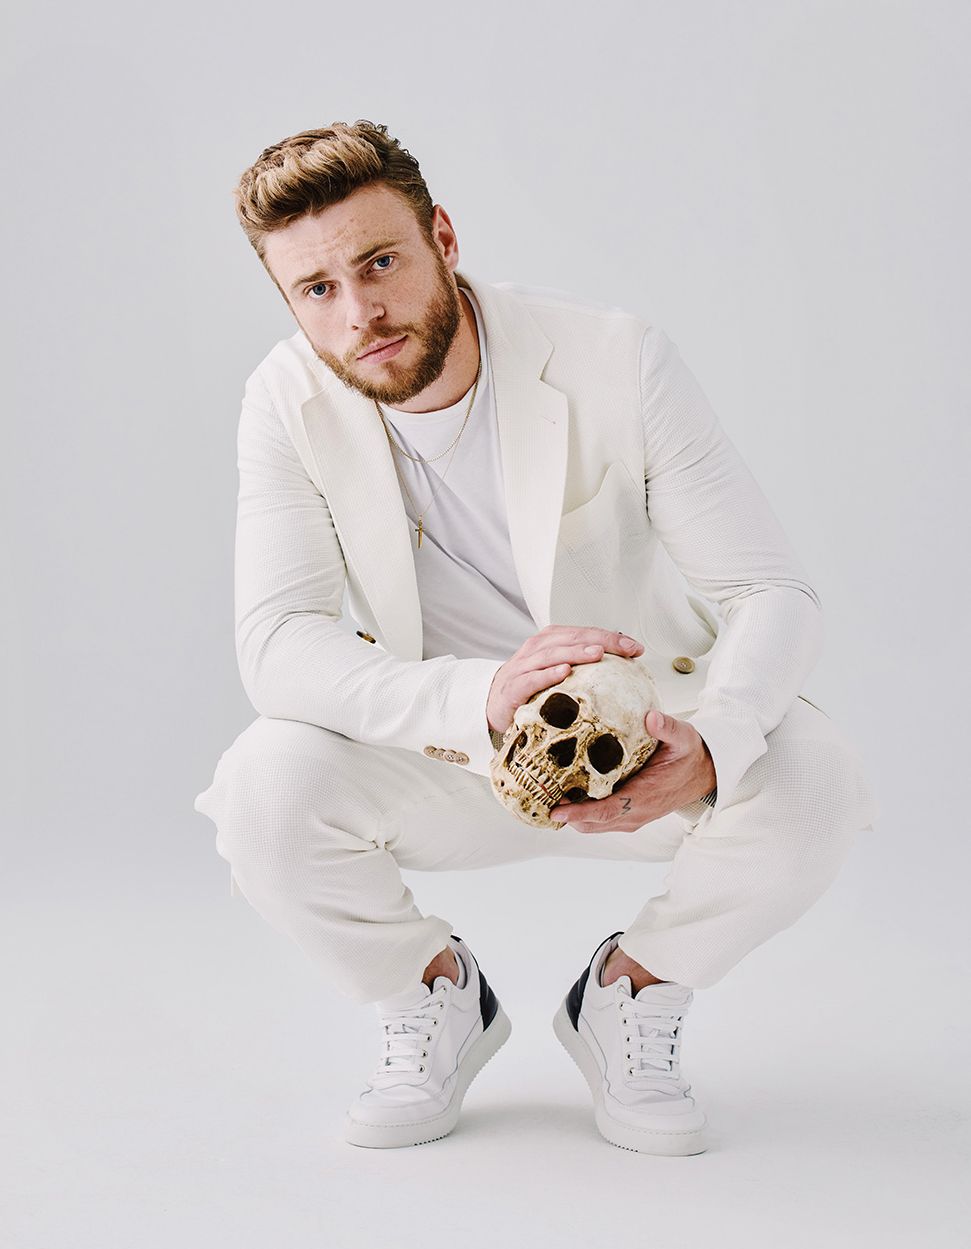 Kenworthy on playing a straight character in American Horror Story: I spent the first 23 years of my life playing a straight man. Every gay man has the experience at some point in his life of pretending to be someone he's not.